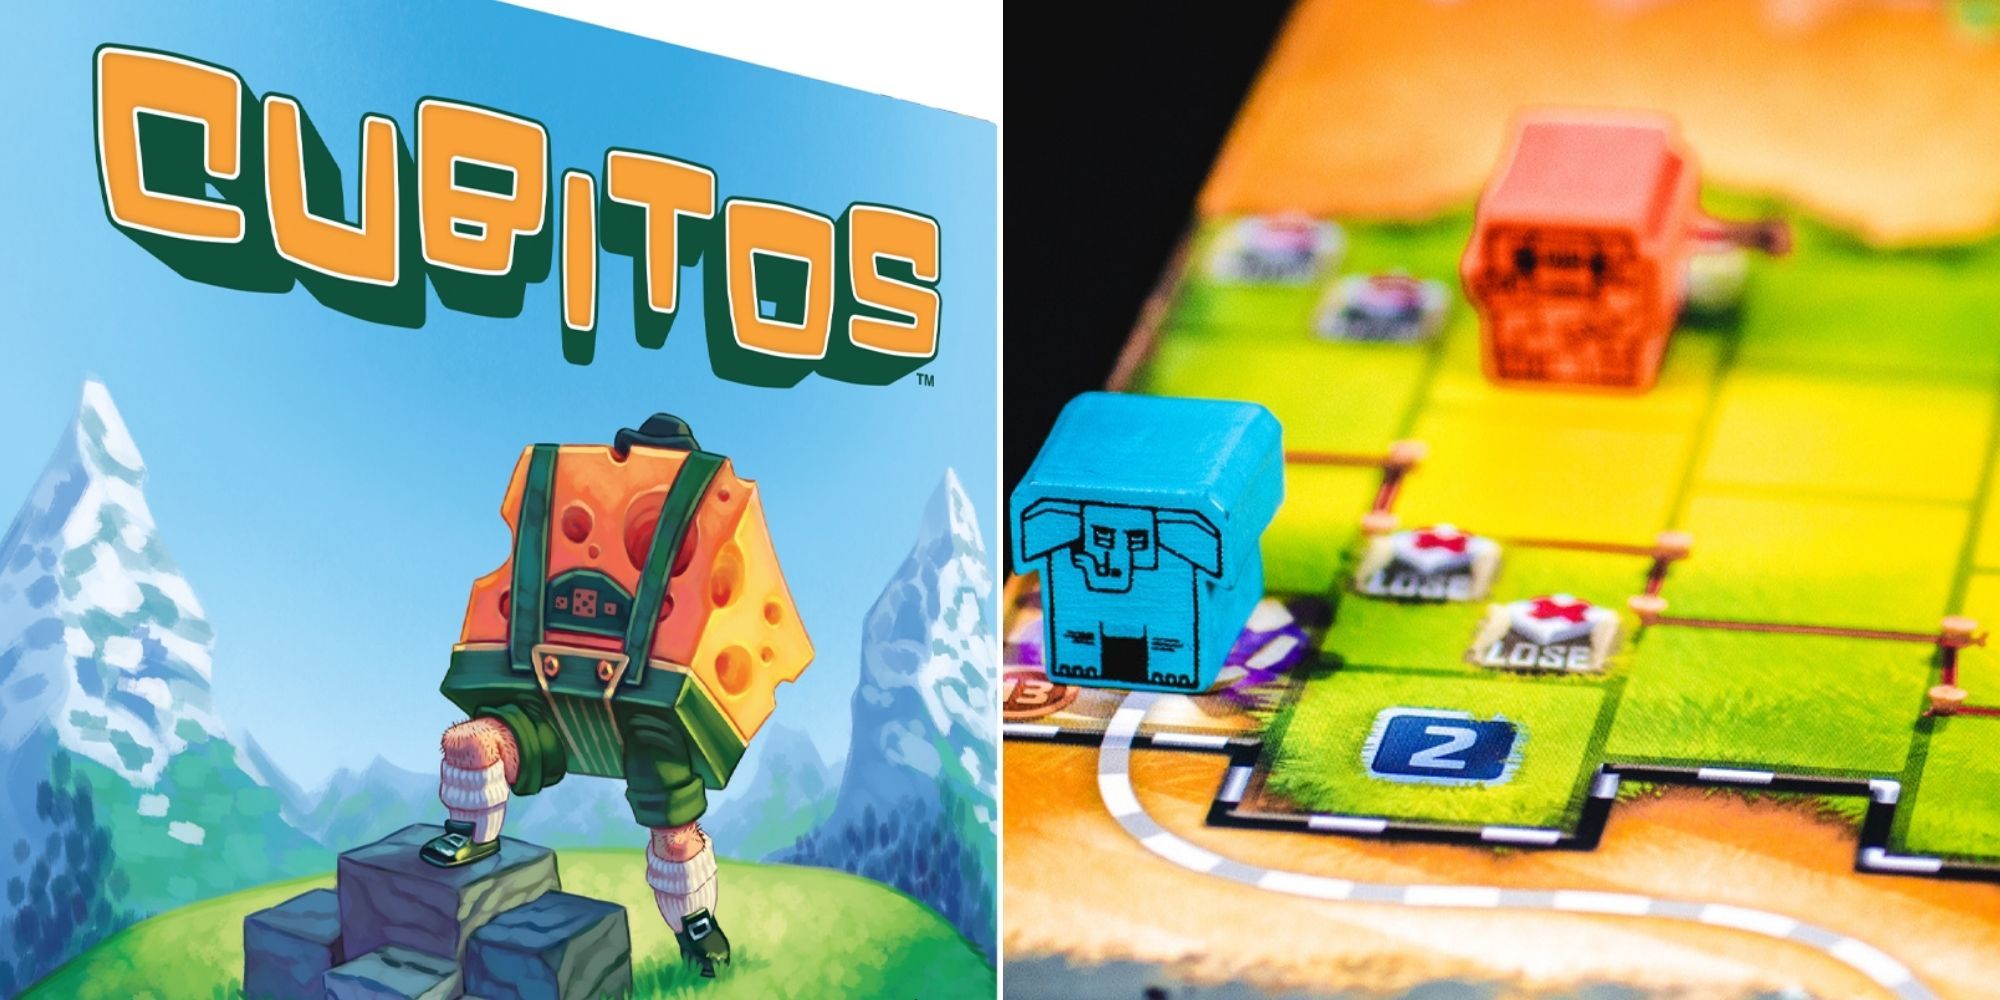 Cubitos - Board Game Box - An Elephant and a Monkey racing on the board